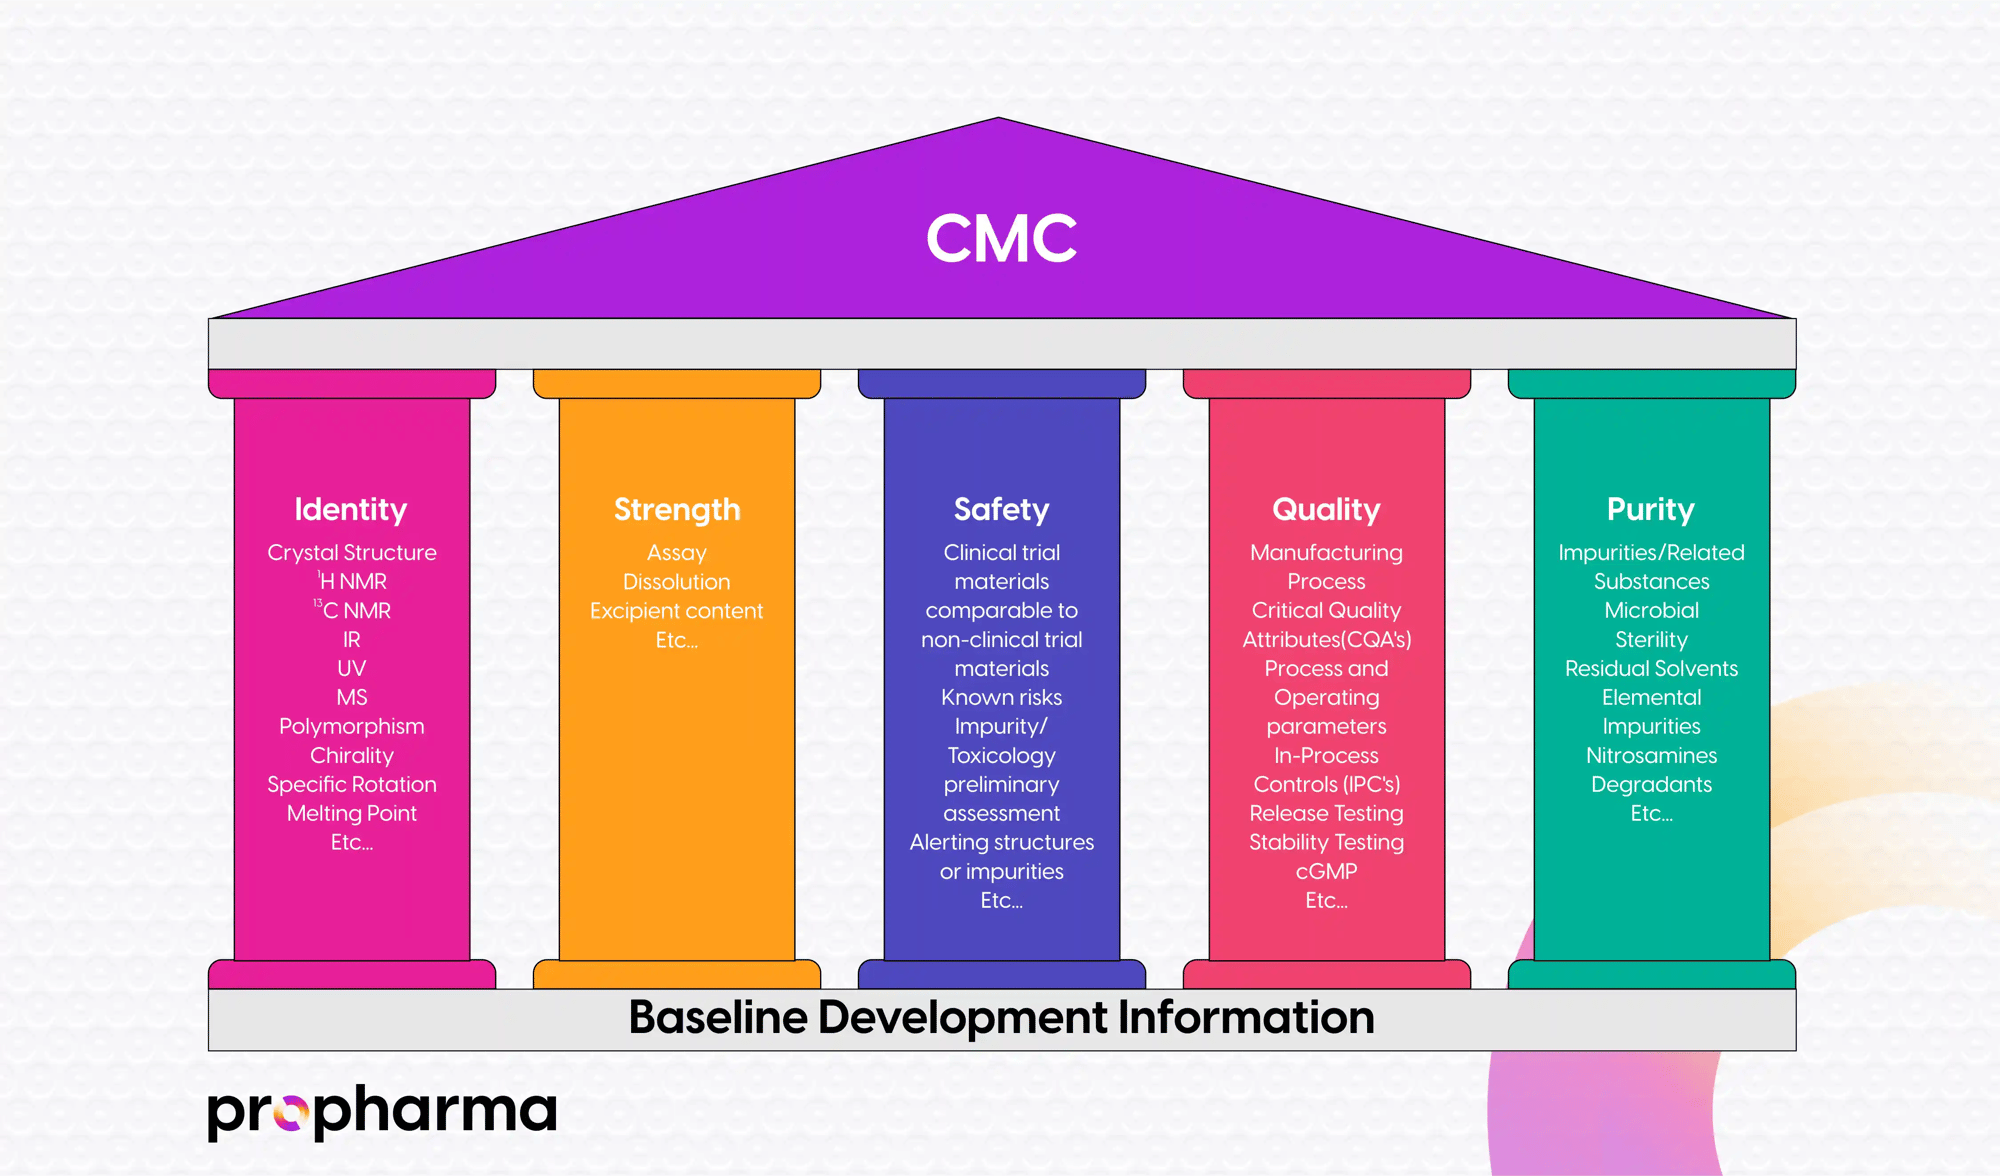 CMC content is compiled into Module 3 of the IND, supporting the 5 CMC Pillars, including Identity, Strength, Safety, Quality, and Purity.